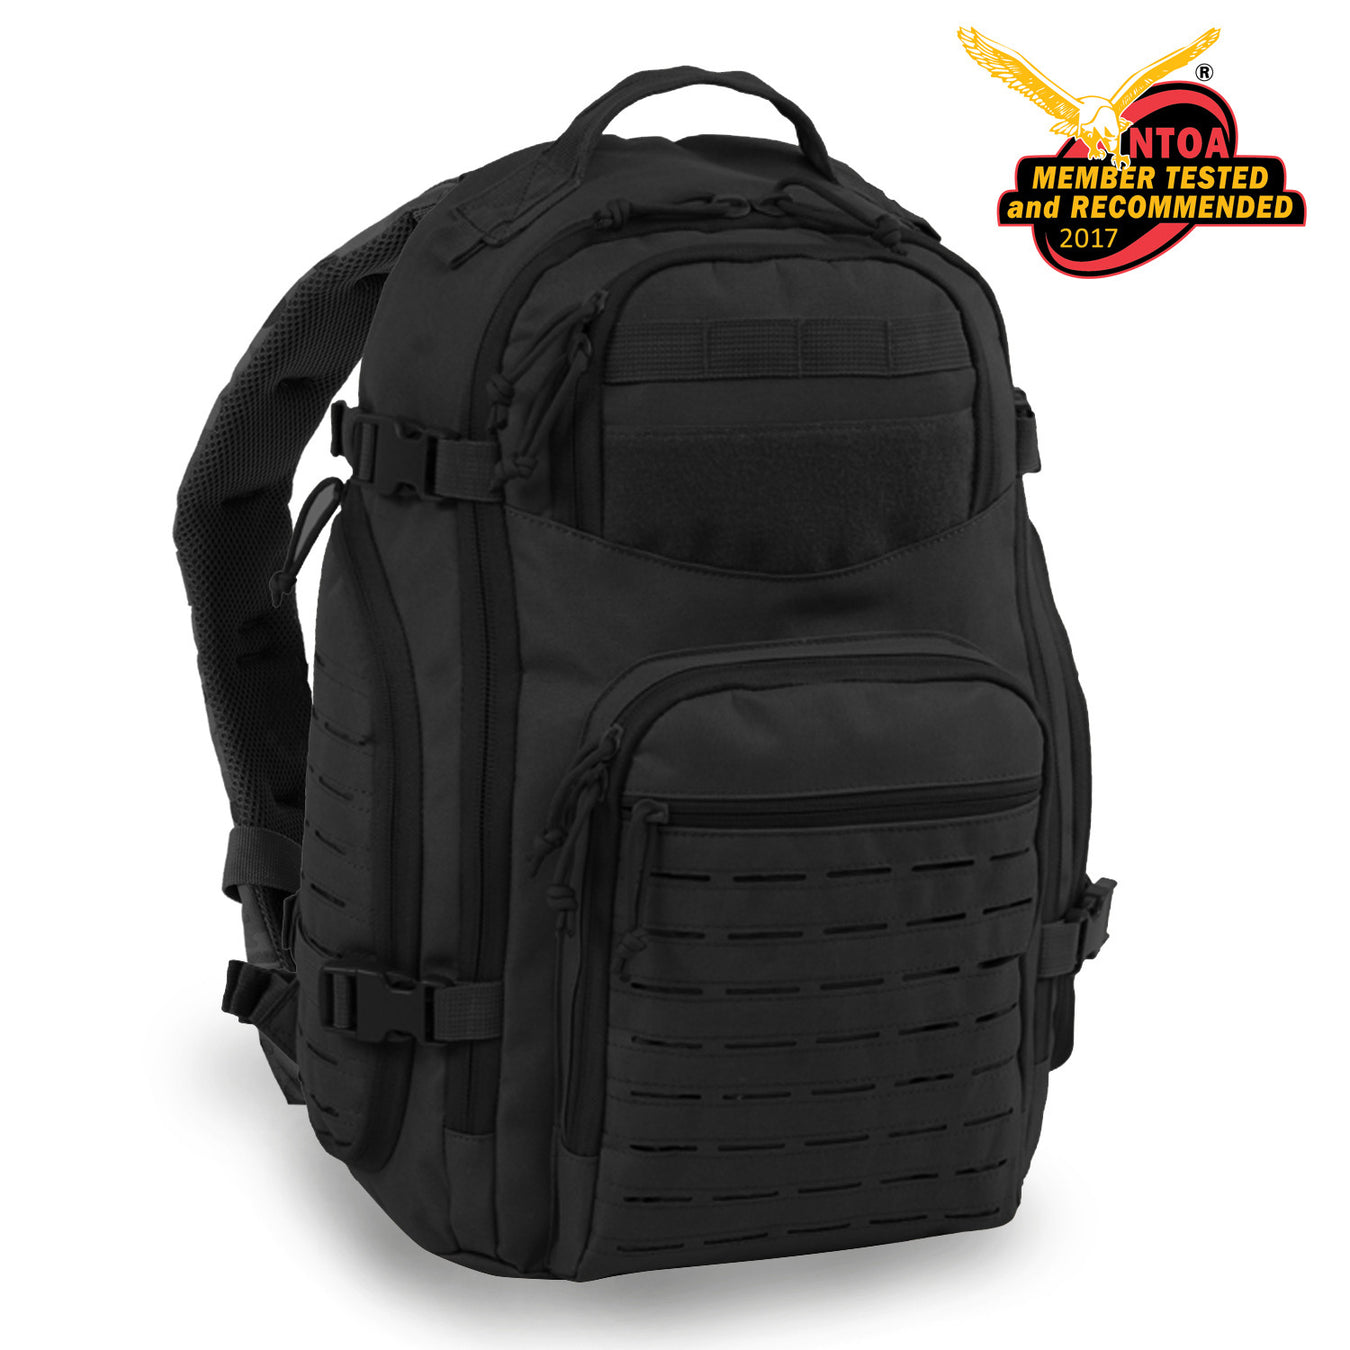 Roger Tactical Rucksack, Laser Cut MOLLE, Backpack, Army, Navy, Marines, Military, 